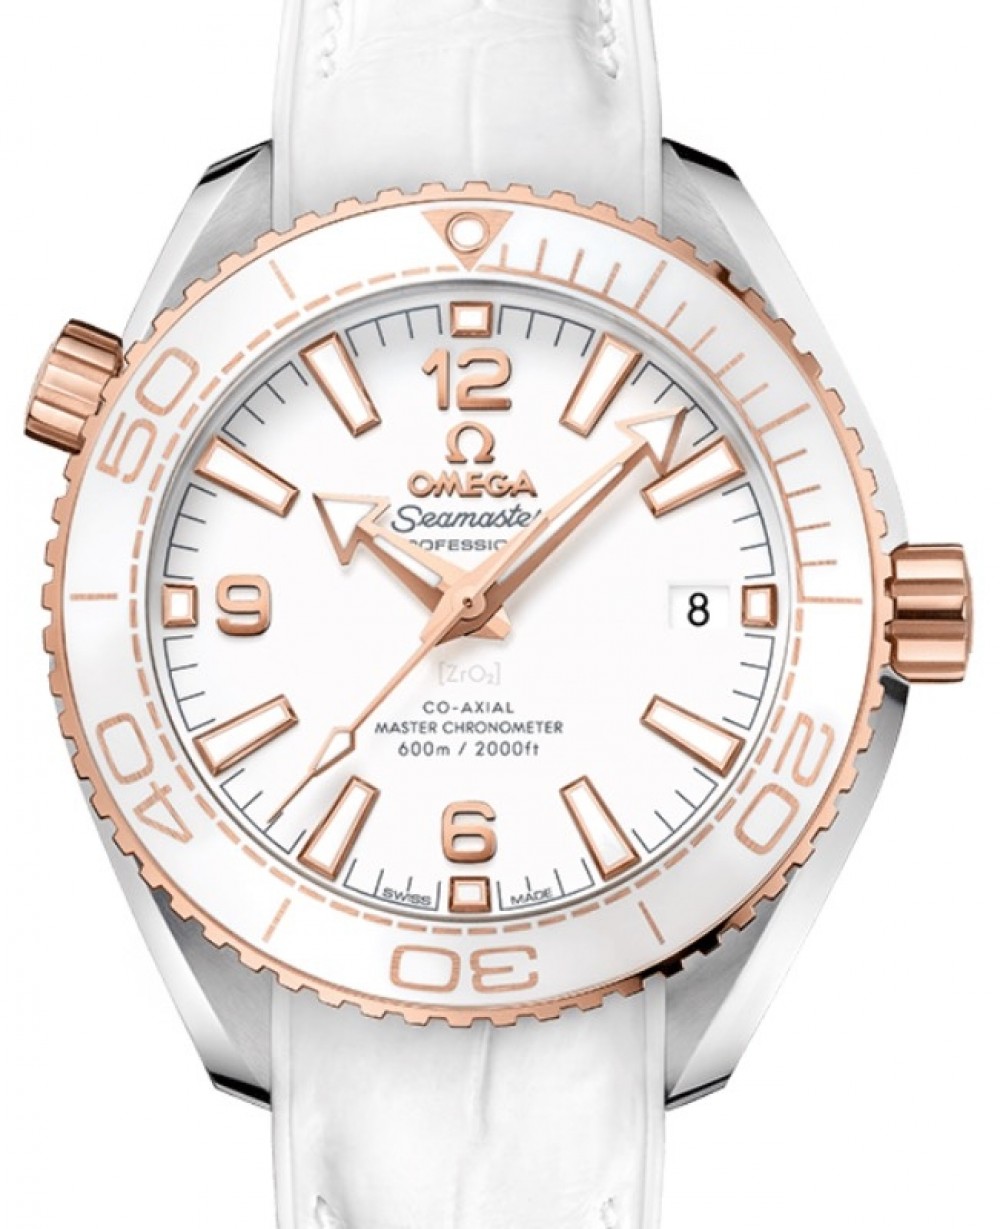 Omega Seamaster Planet Ocean 600M Co-Axial Master Chronometer 39.5mm Sedna  Gold White Dial Leather and Rubber Strap 215.23.40.20.04.001 - BRAND NEW